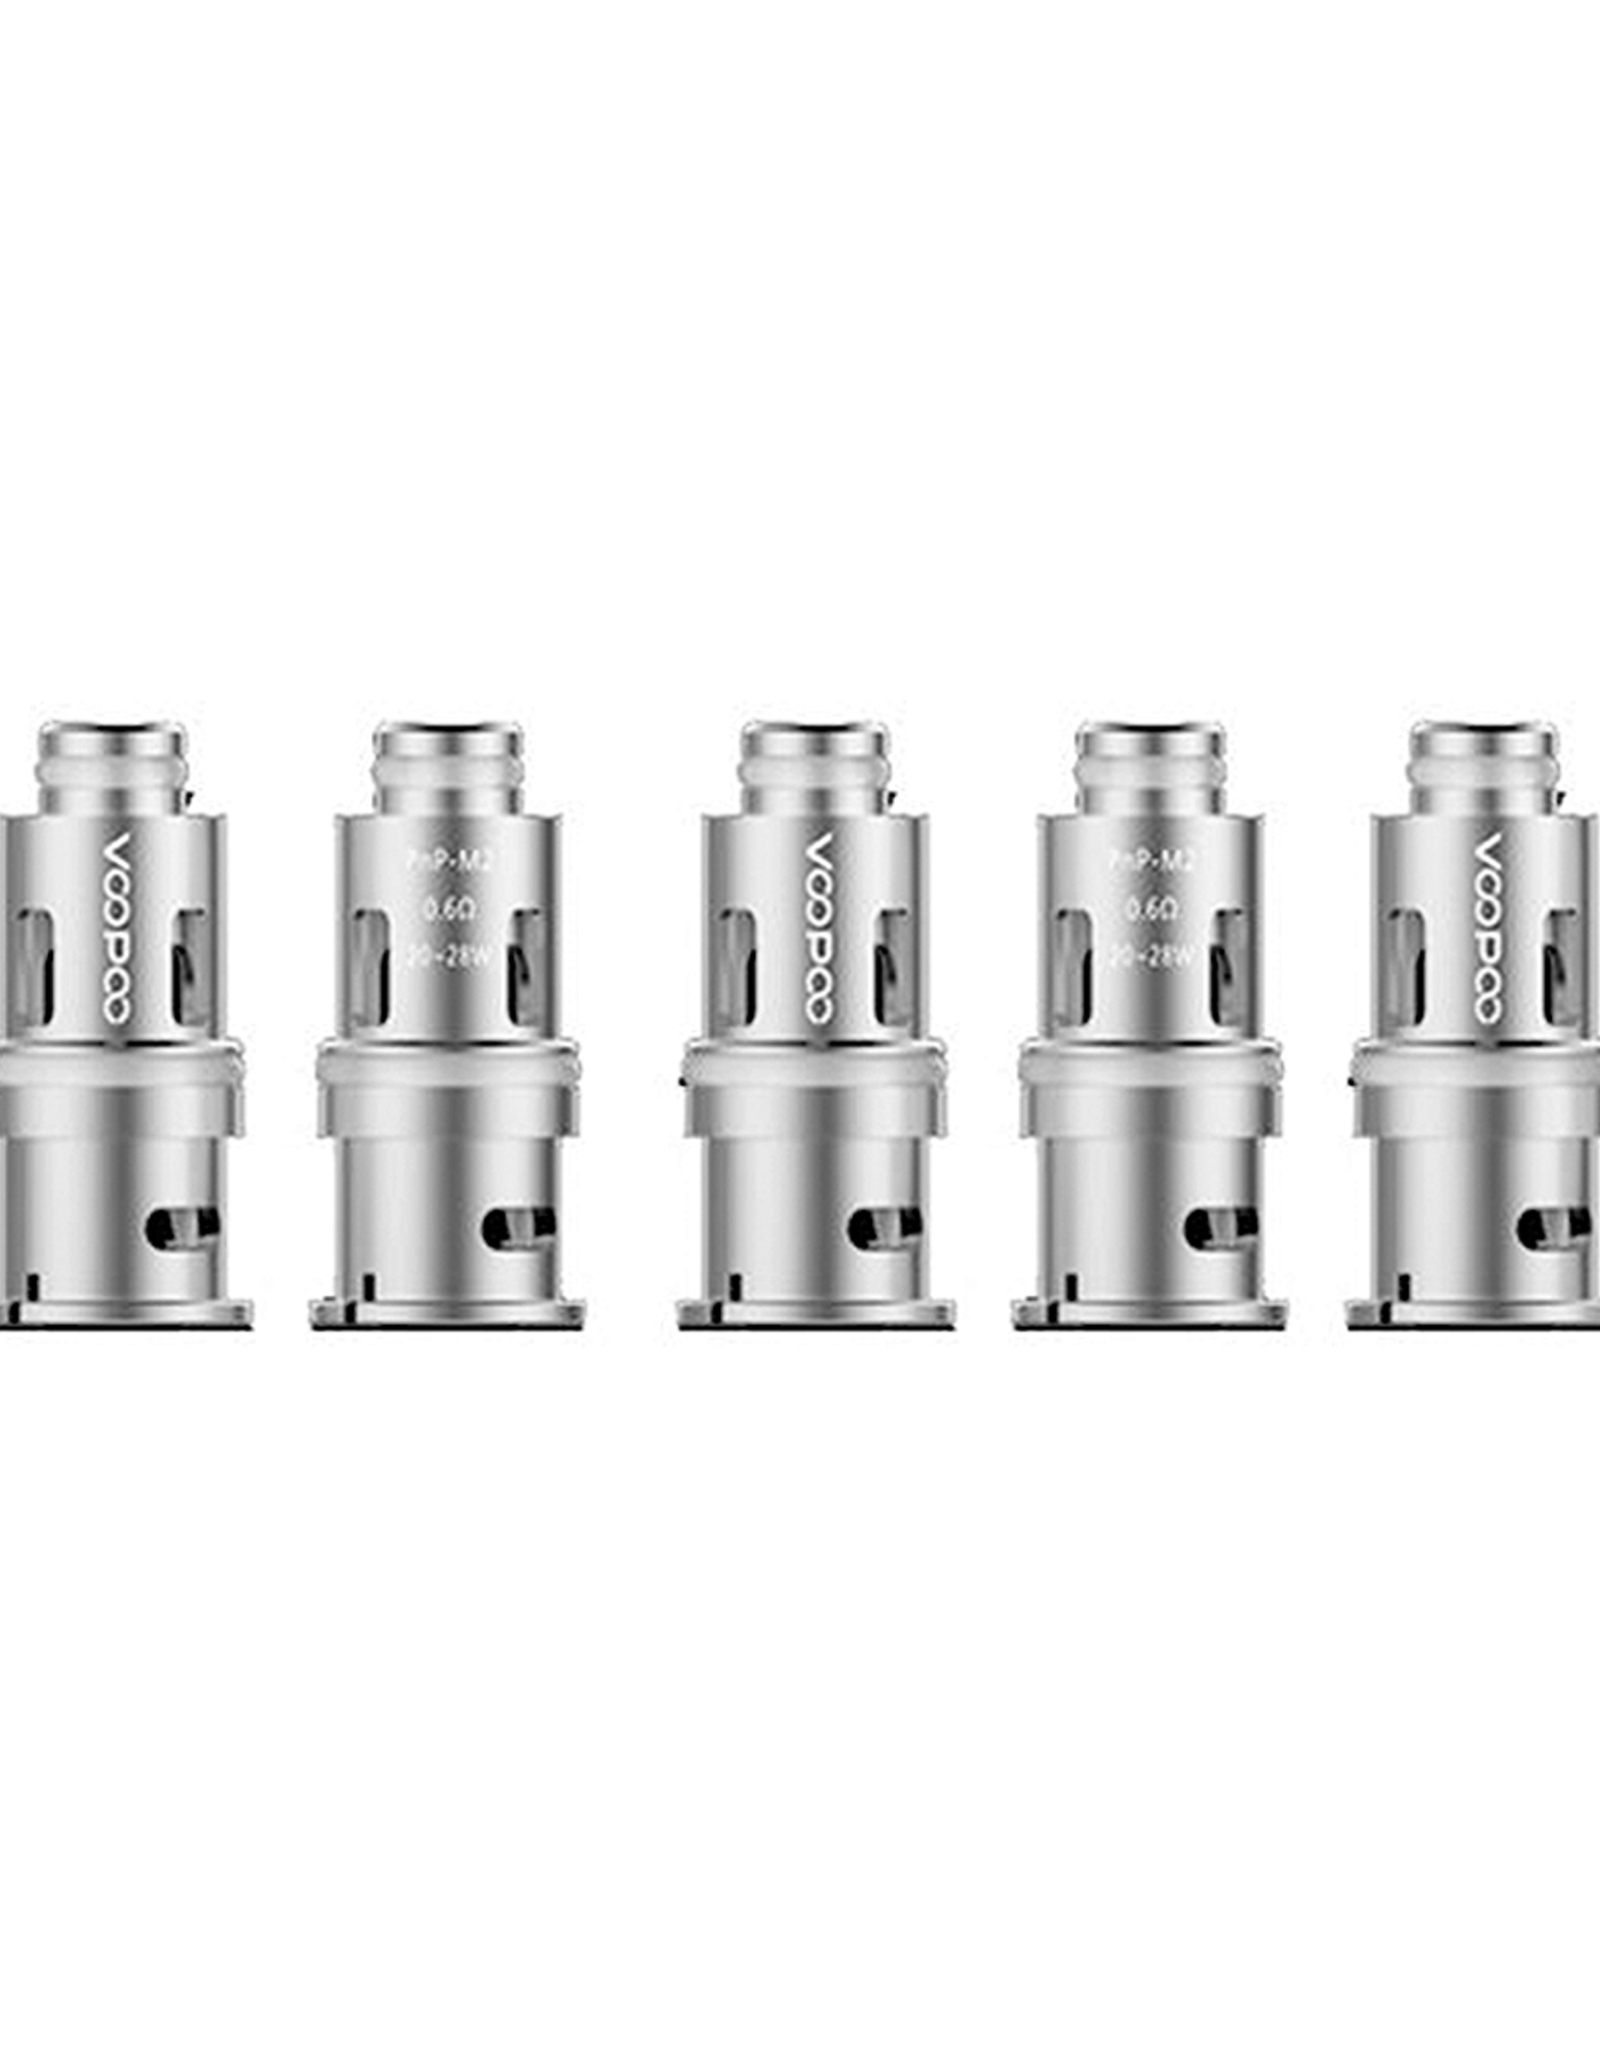 VOOPOO VOOPOO PNP REPLACEMENT COIL (5 PACK)